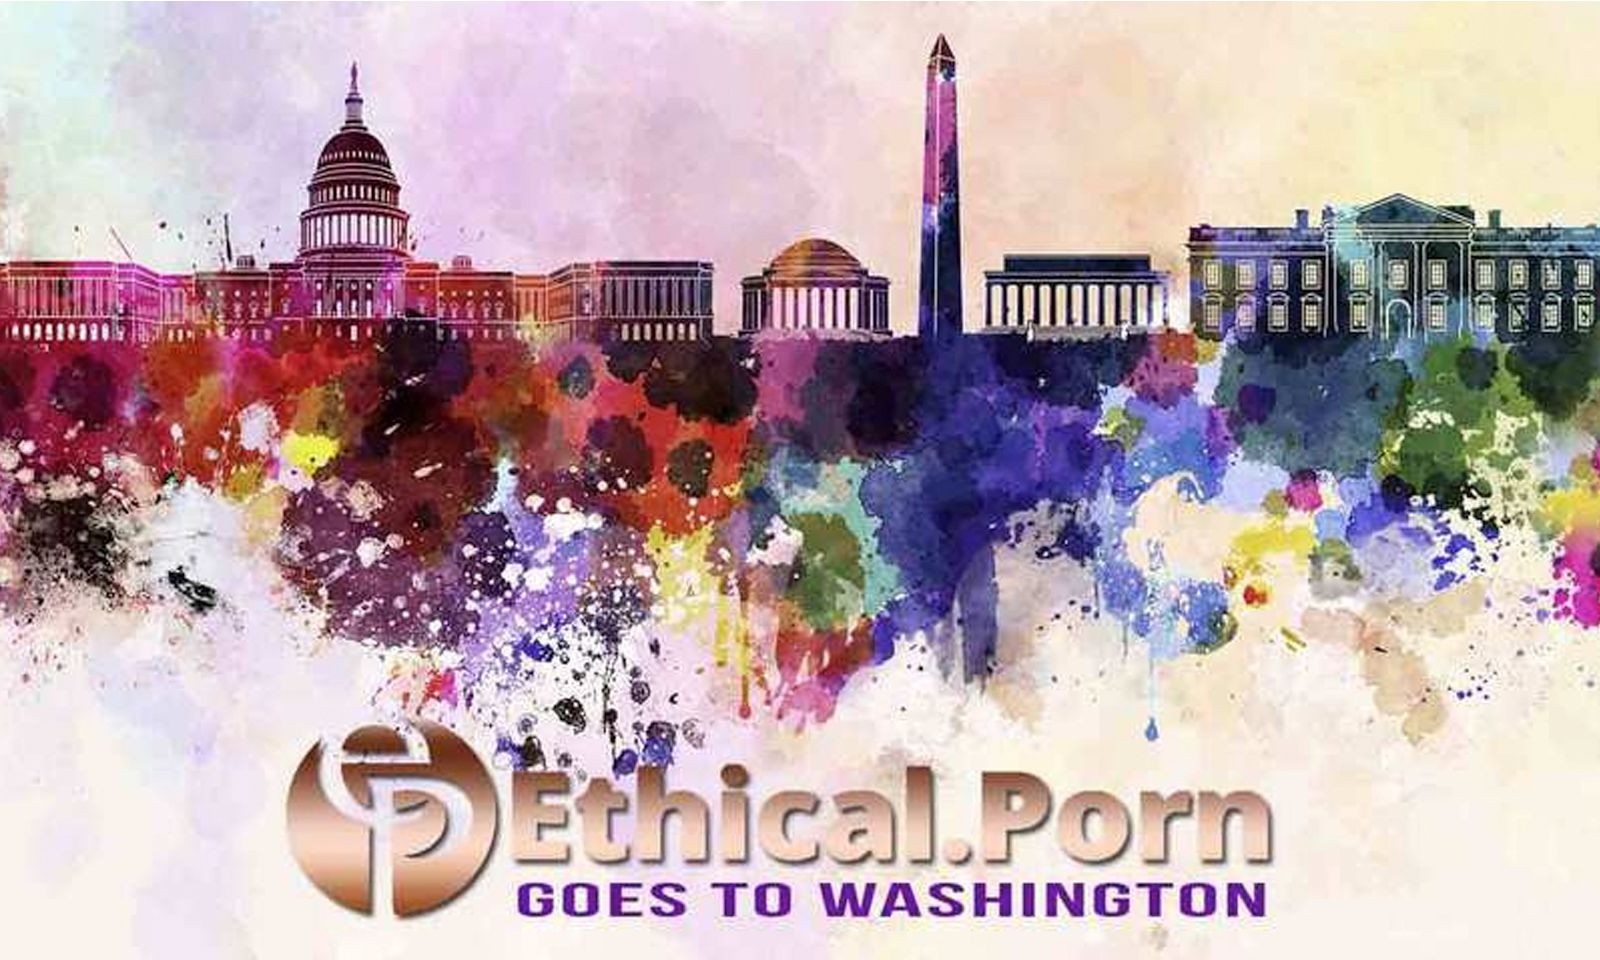 Washington, D.C., People Polled About #EthicalPorn